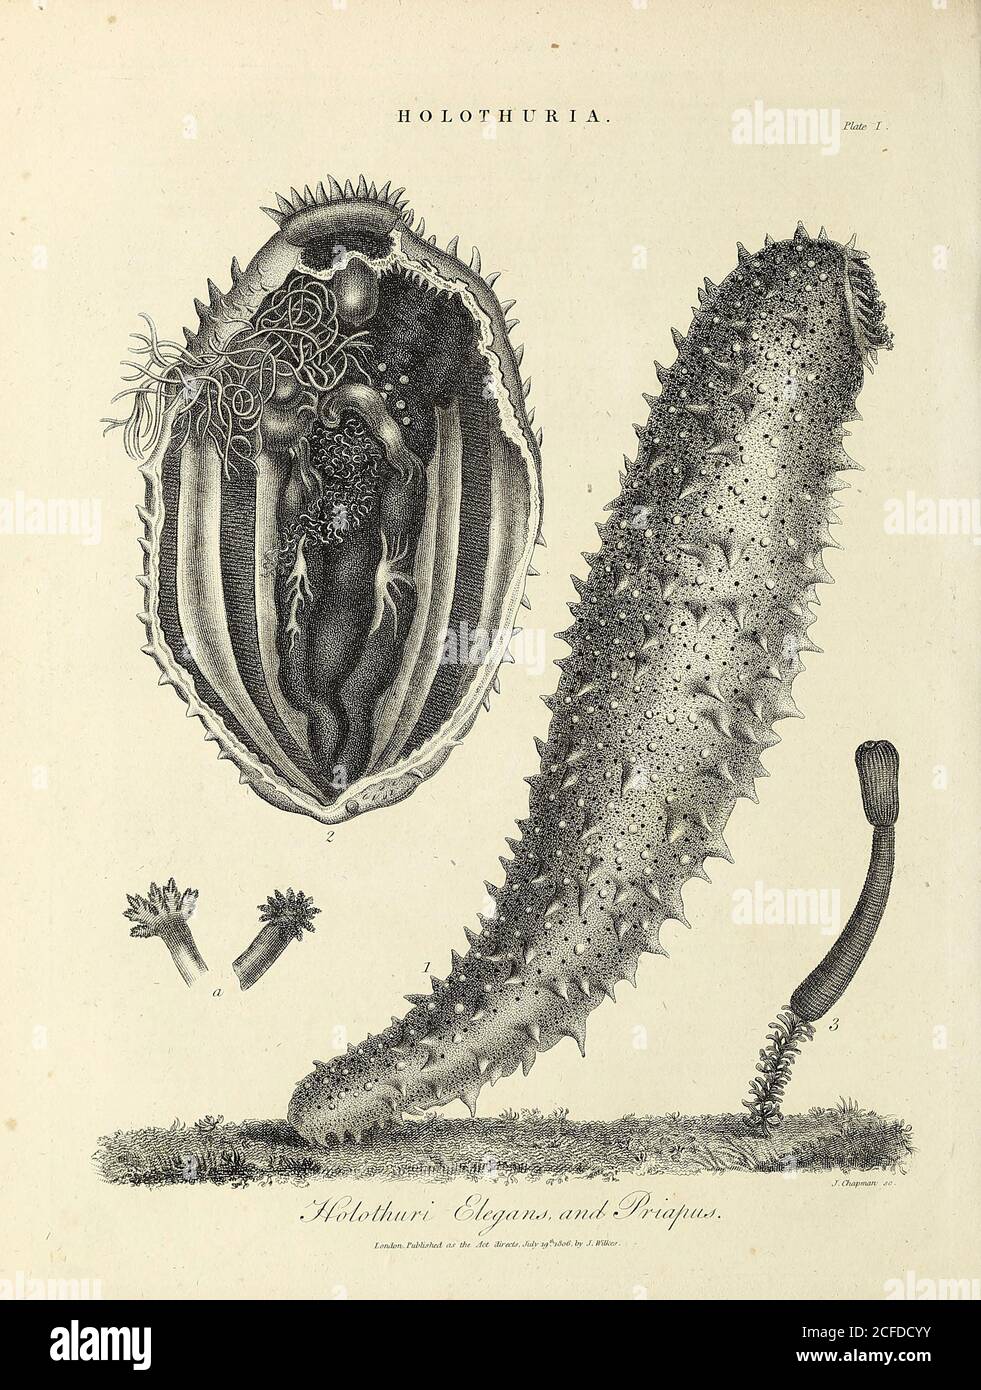 Holothuria [sea cucumbers] Holothuri Elegans and Priapus Copperplate engraving by J. Chapman. From the Encyclopaedia Londinensis or, Universal dictionary of arts, sciences, and literature; Volume X;  Edited by Wilkes, John. Published in London in 1811 Stock Photo